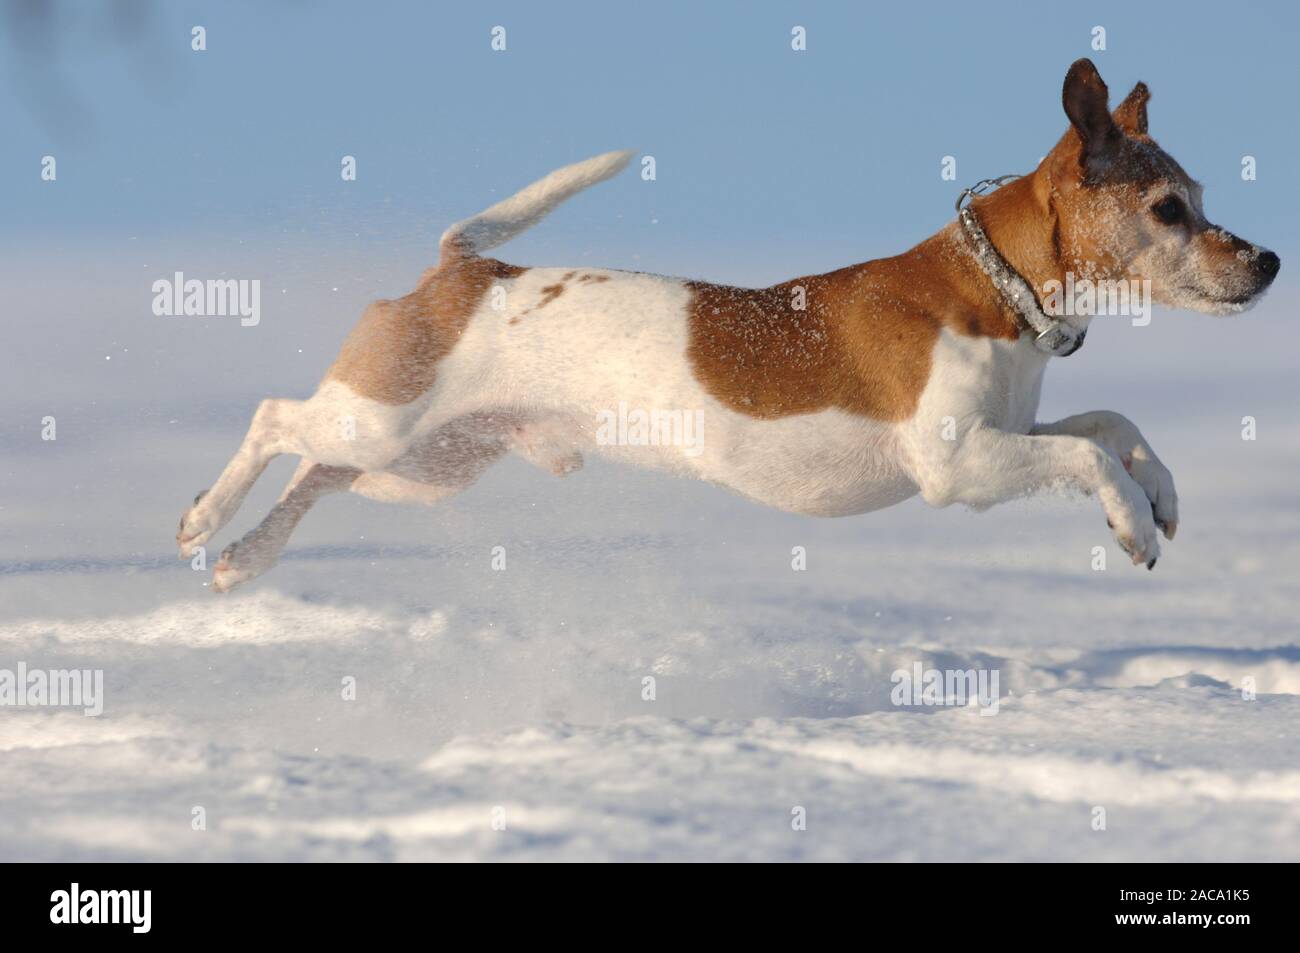 Jack Russel Terrier in the snow Stock Photo